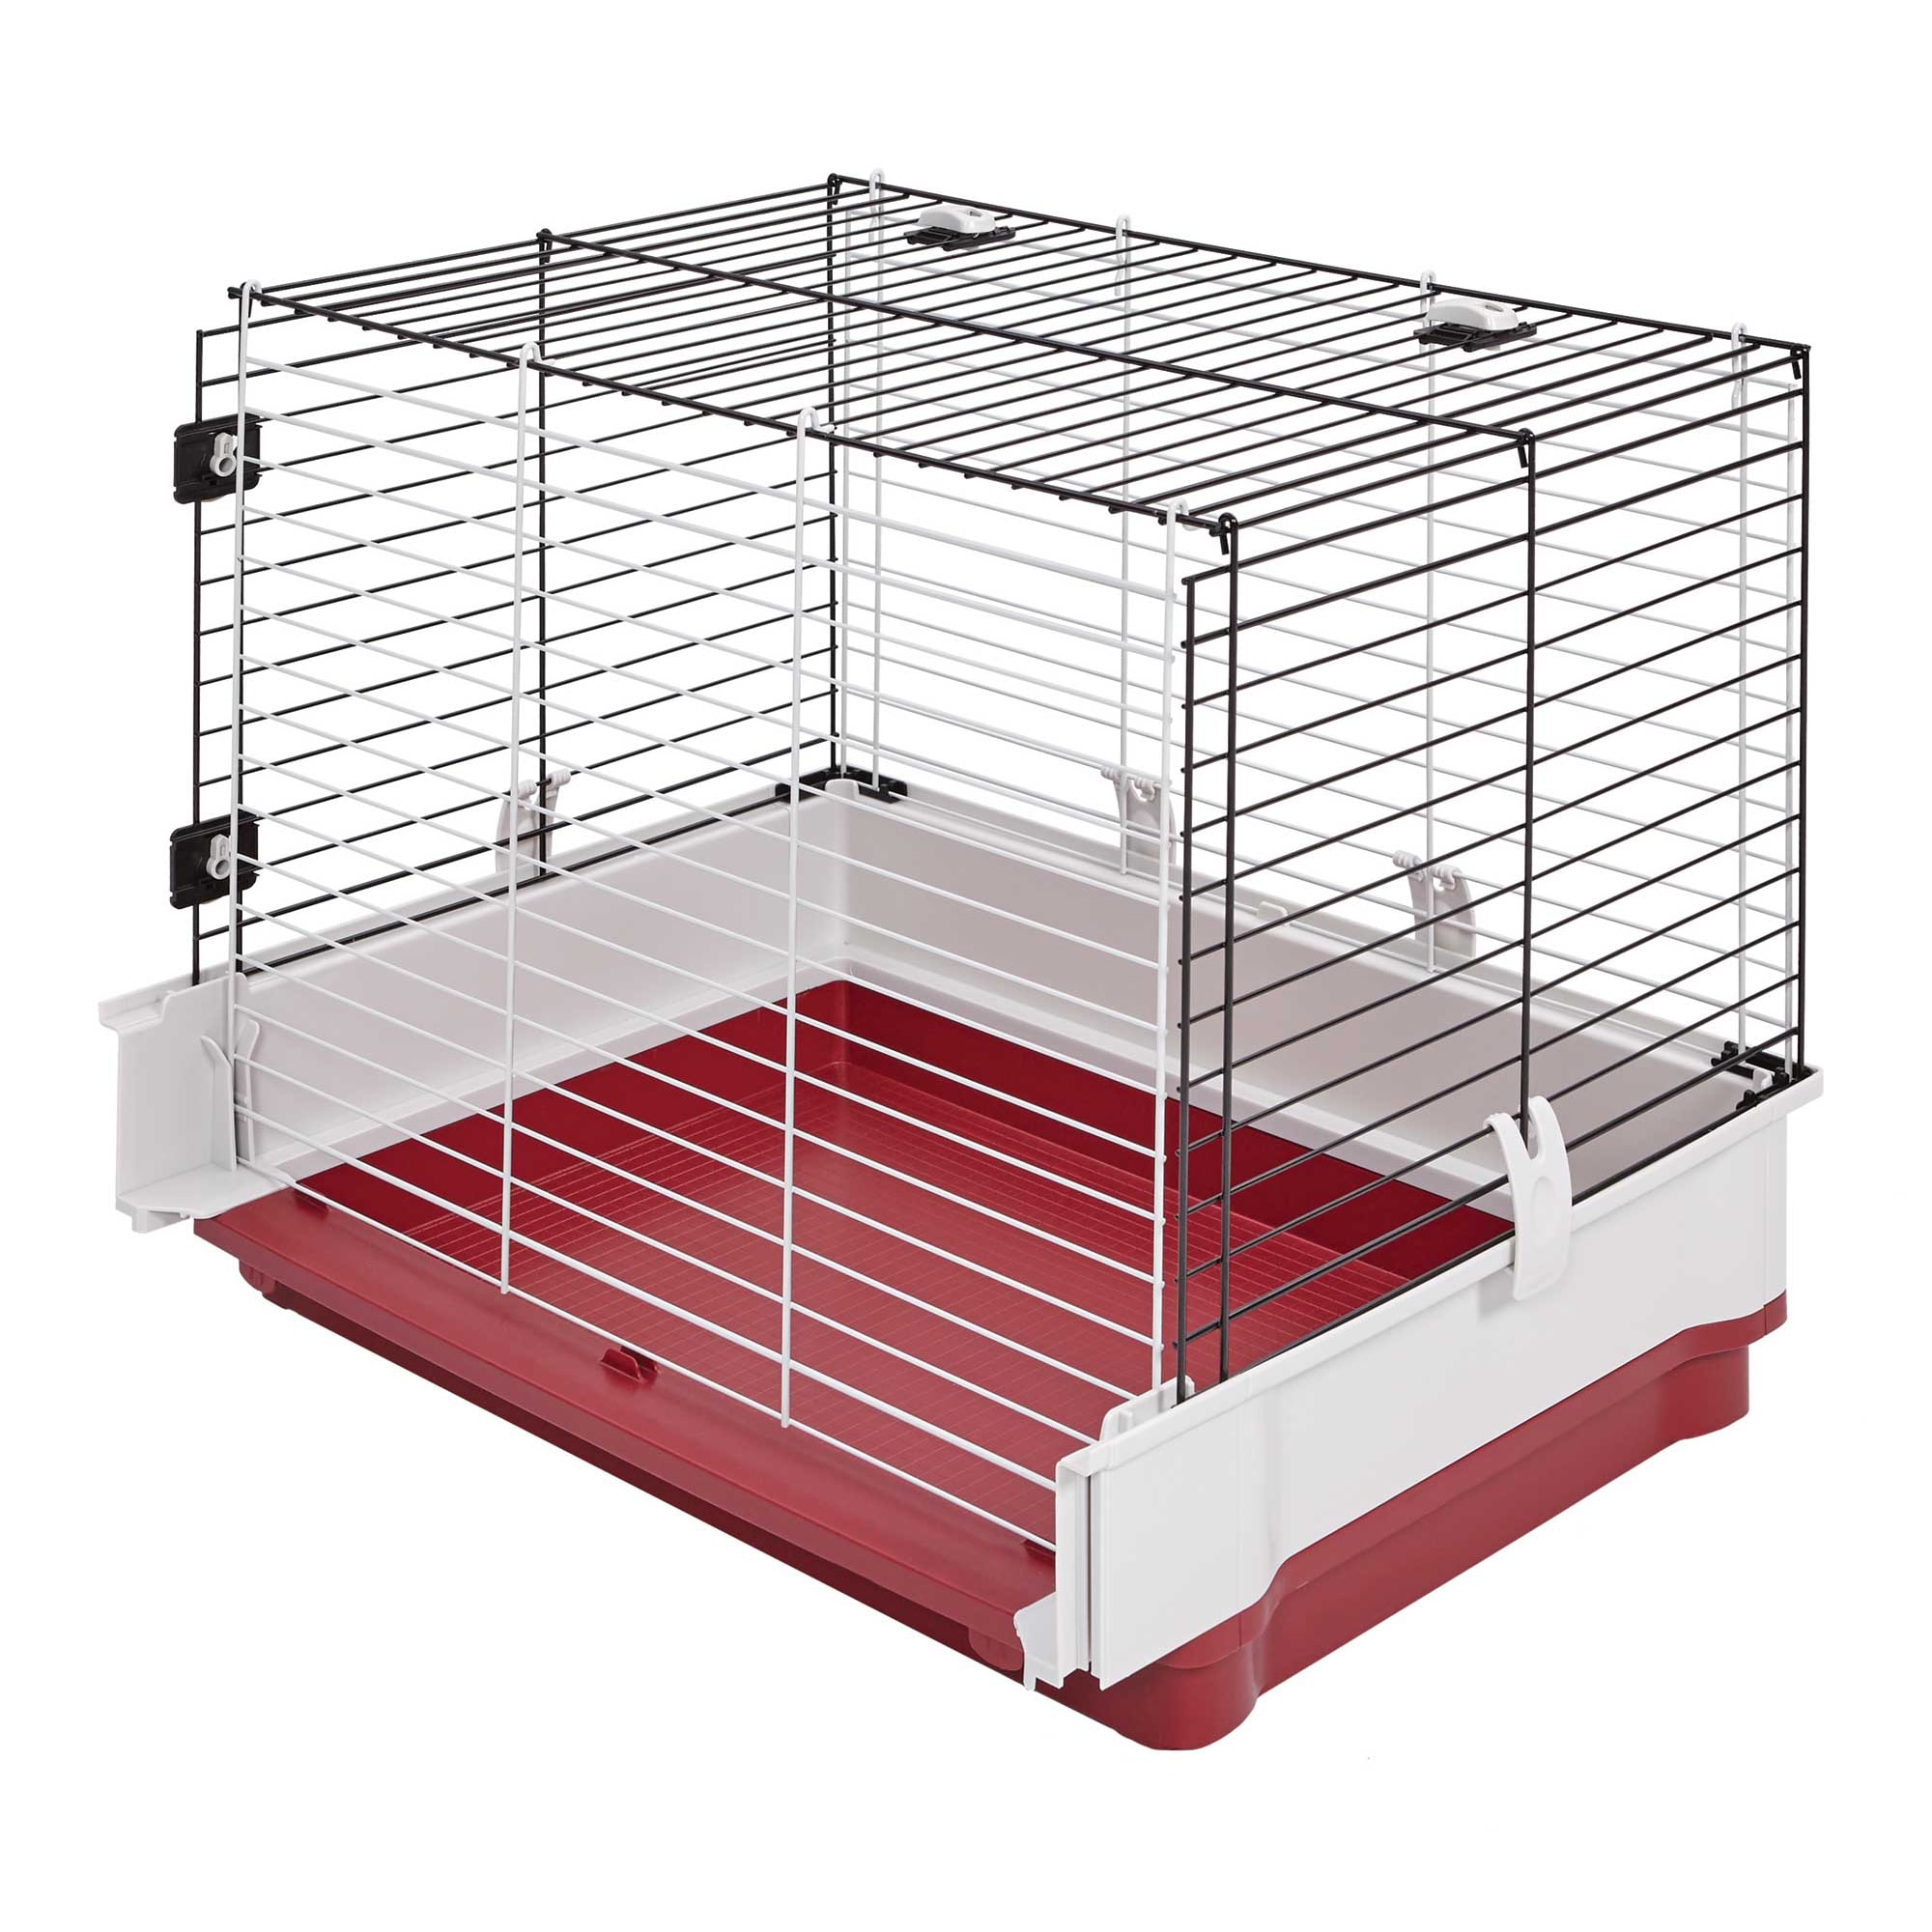 Photos - Rodent Cage / House Midwest Wabbitat Deluxe Rabbit Home Wire Extension, 18.71" L X 23. 